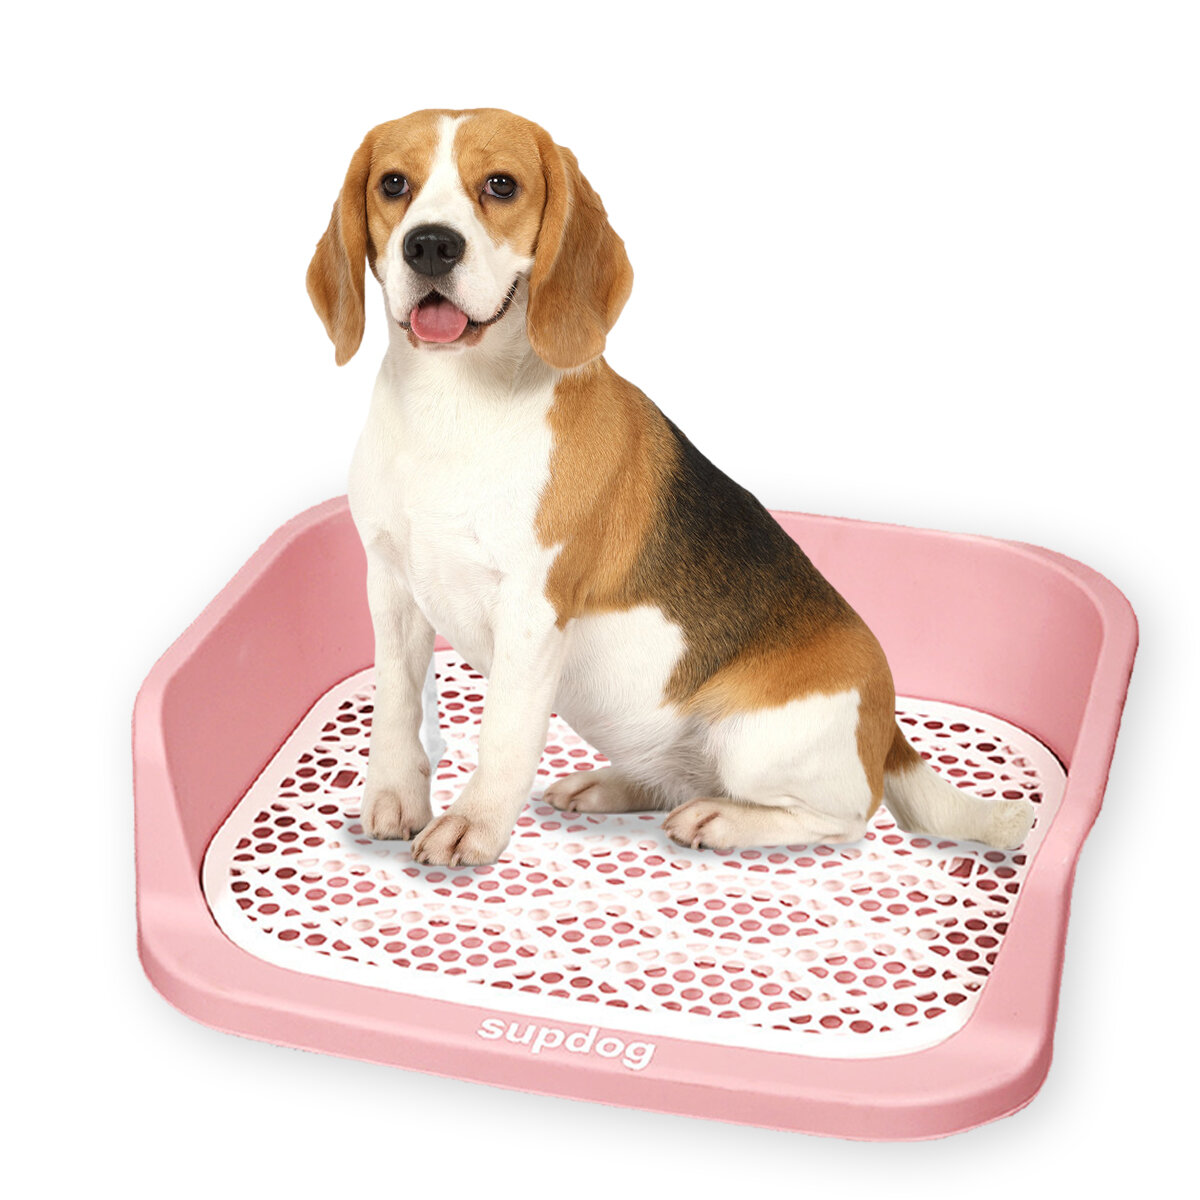 Image of Pet Loo Portable Outdoor or Indoor Dog Toliet Alternative to Puppy Pads for Small Medium Large Dogs